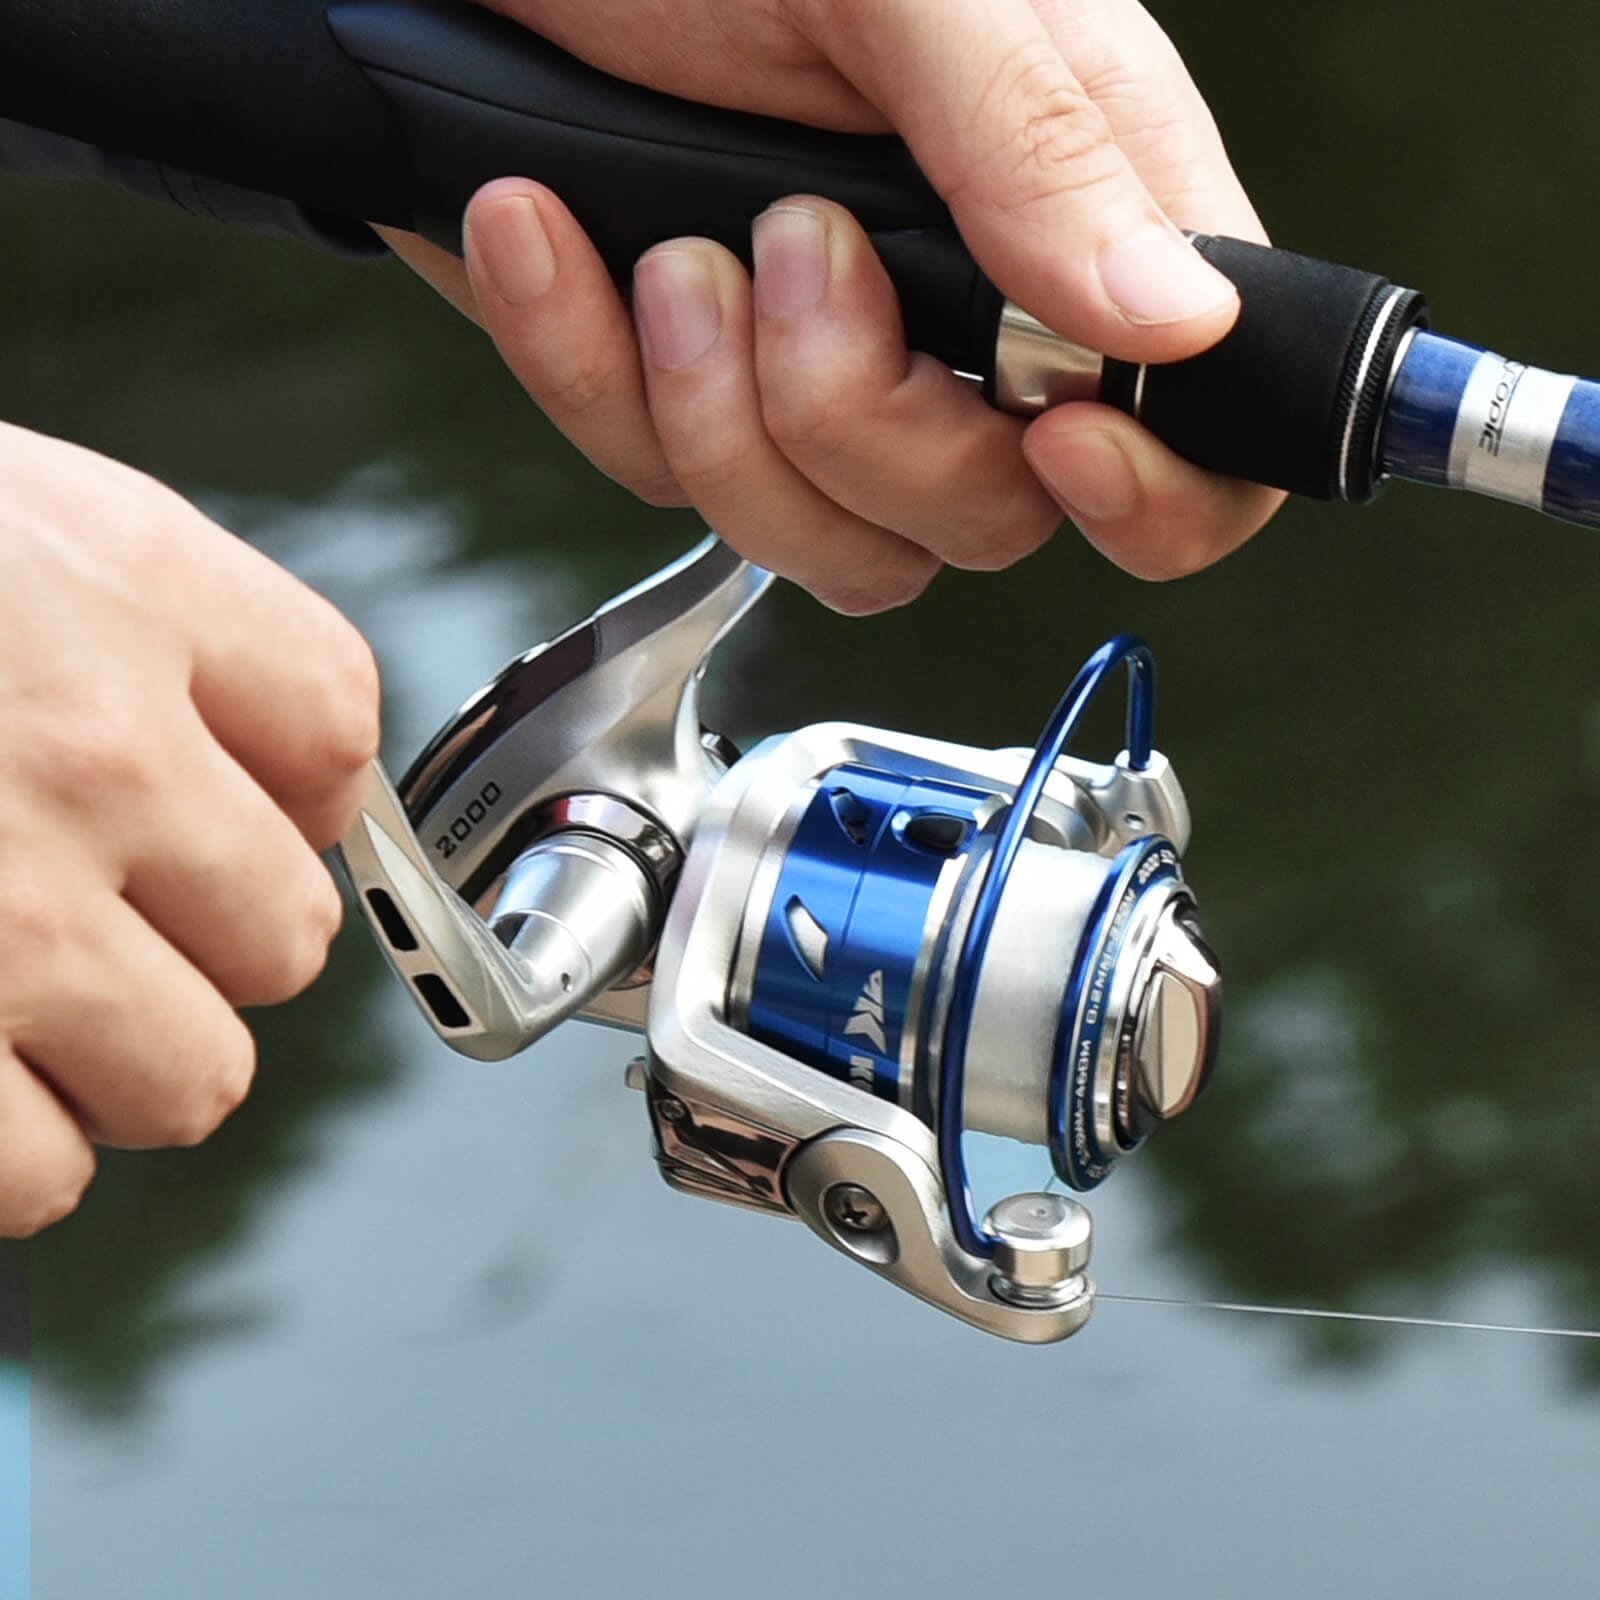 KastKing Summer Spinning Reel & Compass Telescopic Rod Review